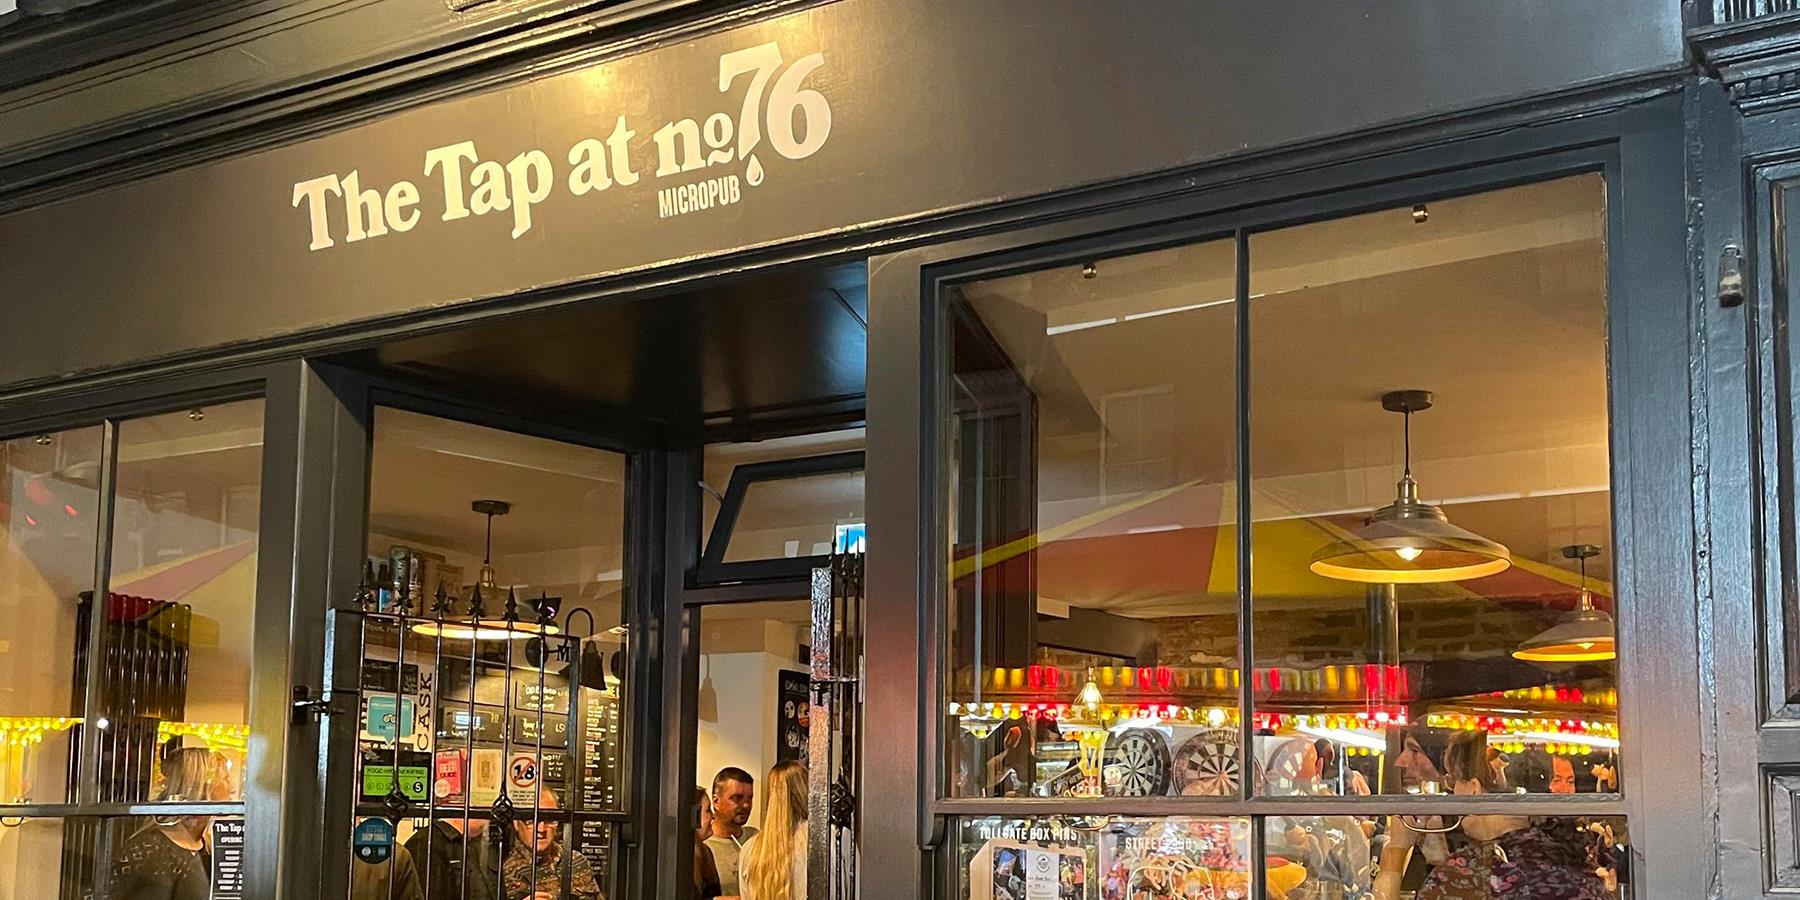 The outside of the Tap at No 76